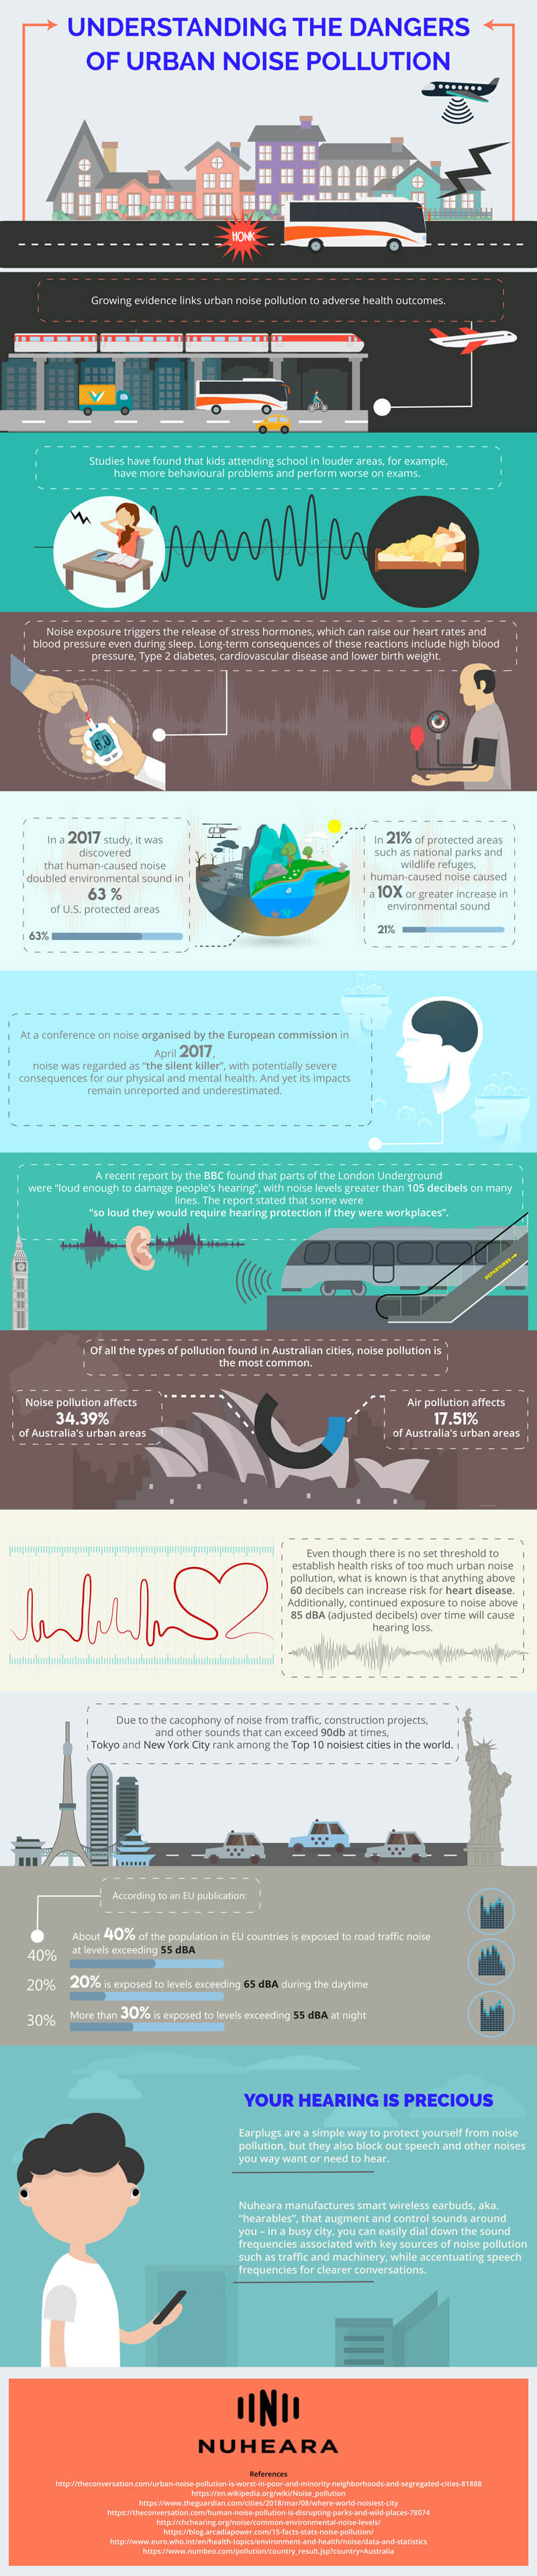 Dangers of Noise Pollution infographic - Nuheara